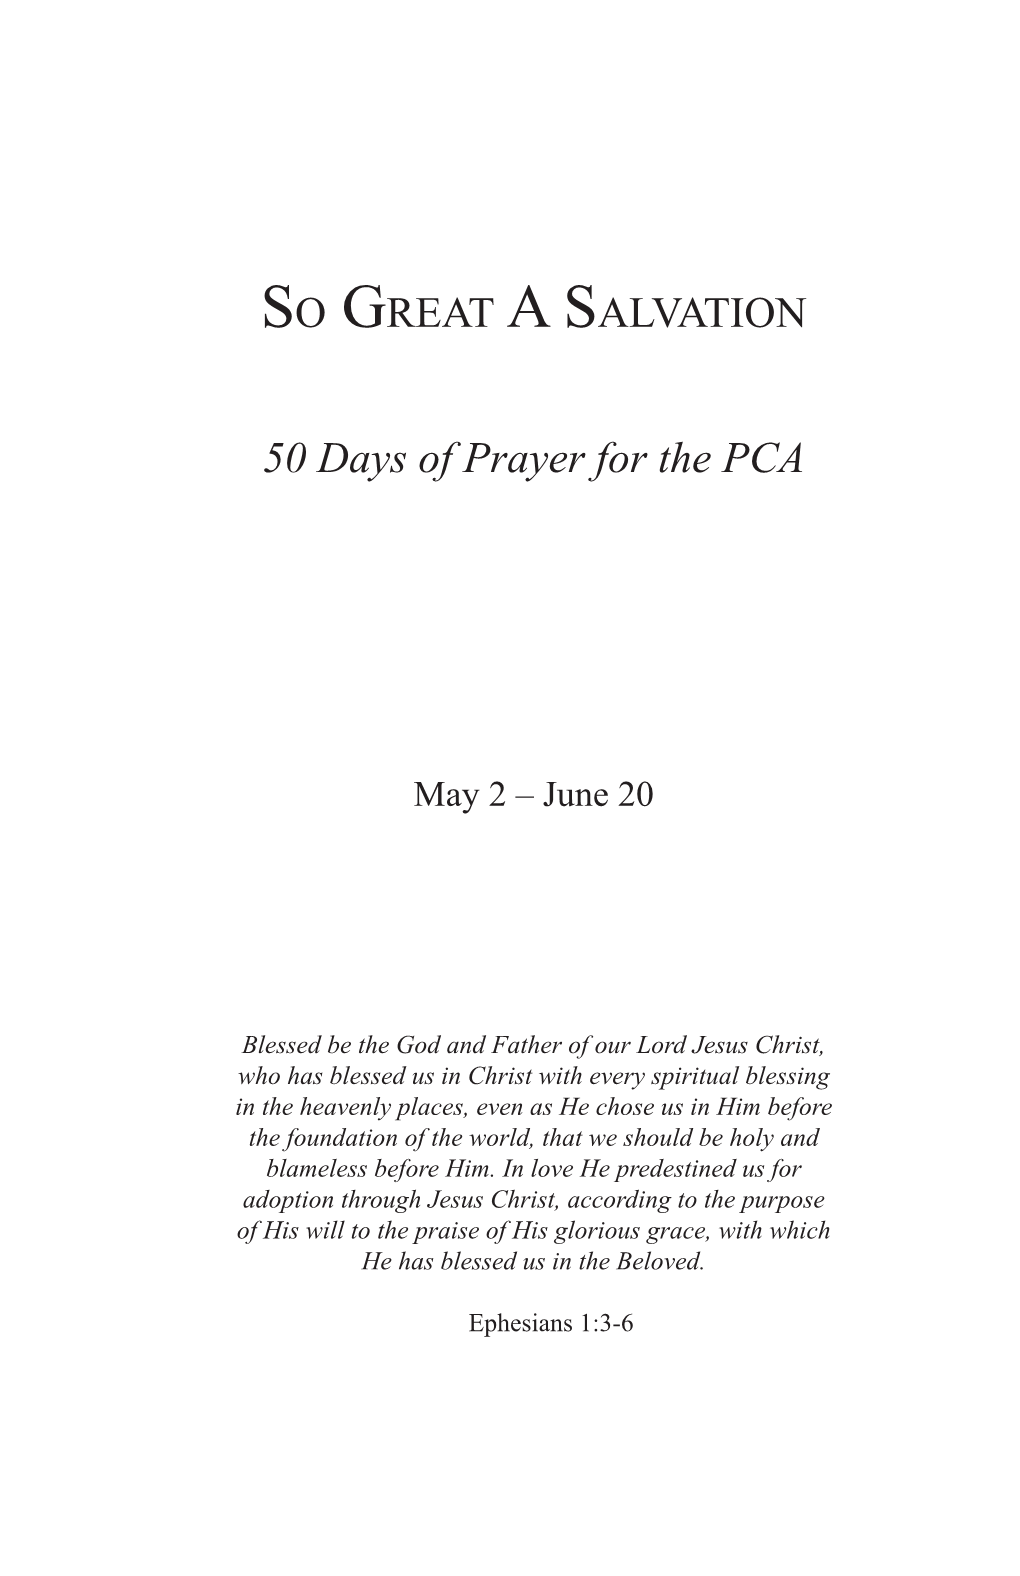 SO GREAT a SALVATION 50 Days of Prayer for The